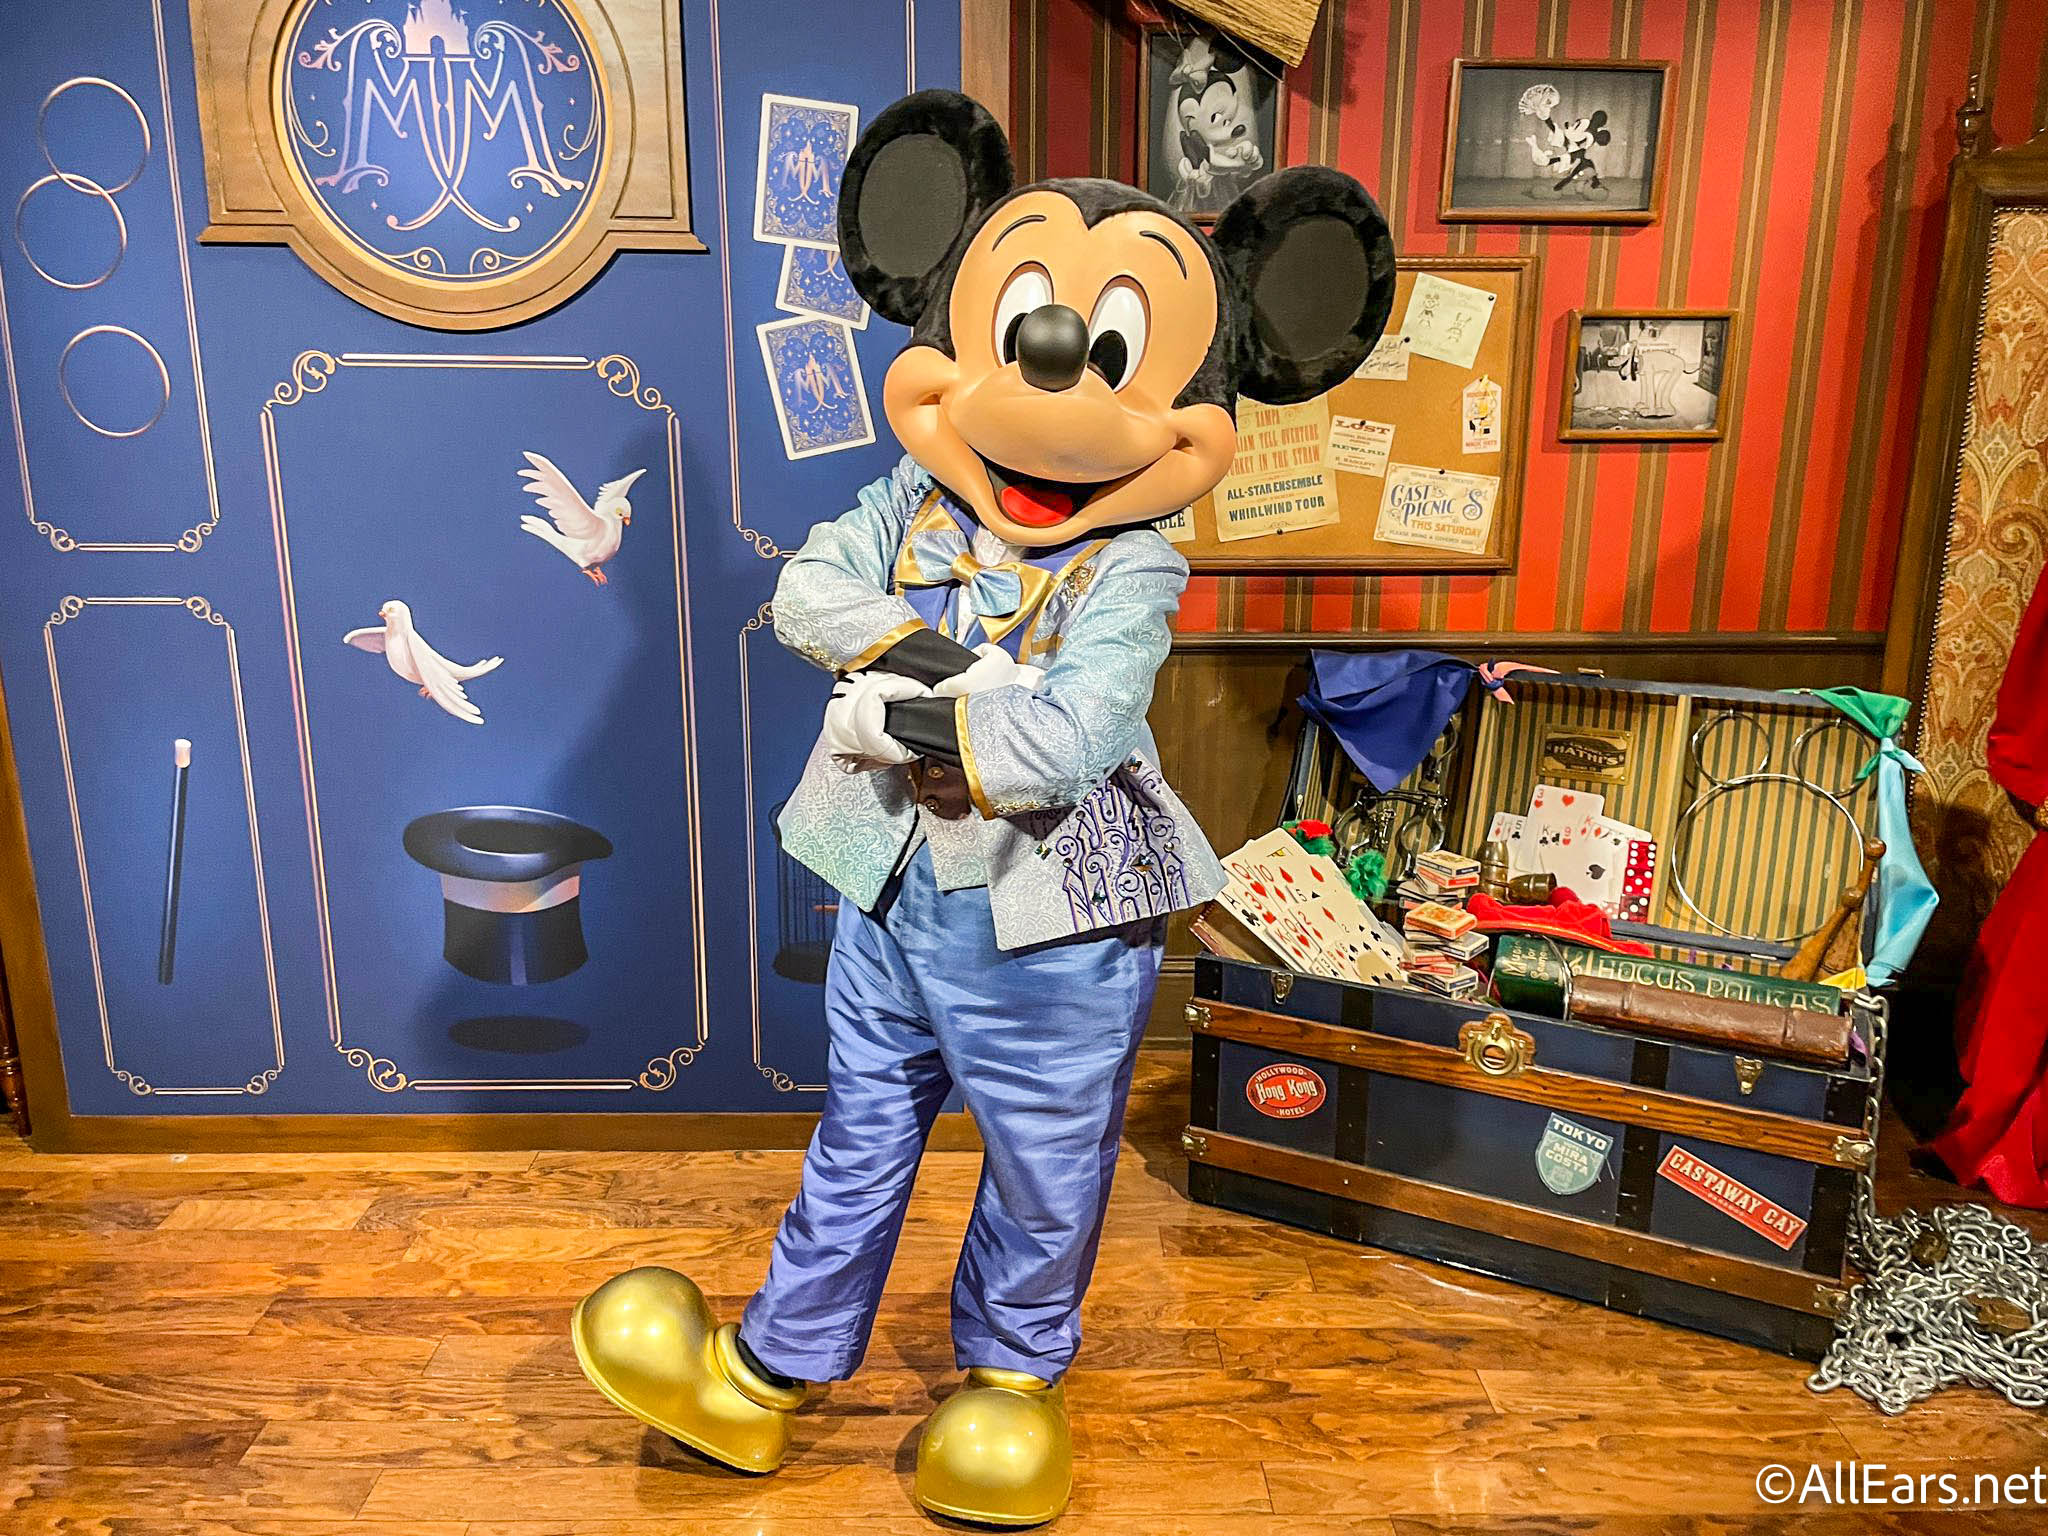 https://allears.net/wp-content/uploads/2021/10/wdw-2021-magic-kingdom-town-square-theater-mickey-mouse-meet-and-greet-character-sighting-modified-50th-anniversary-costume-11.jpg